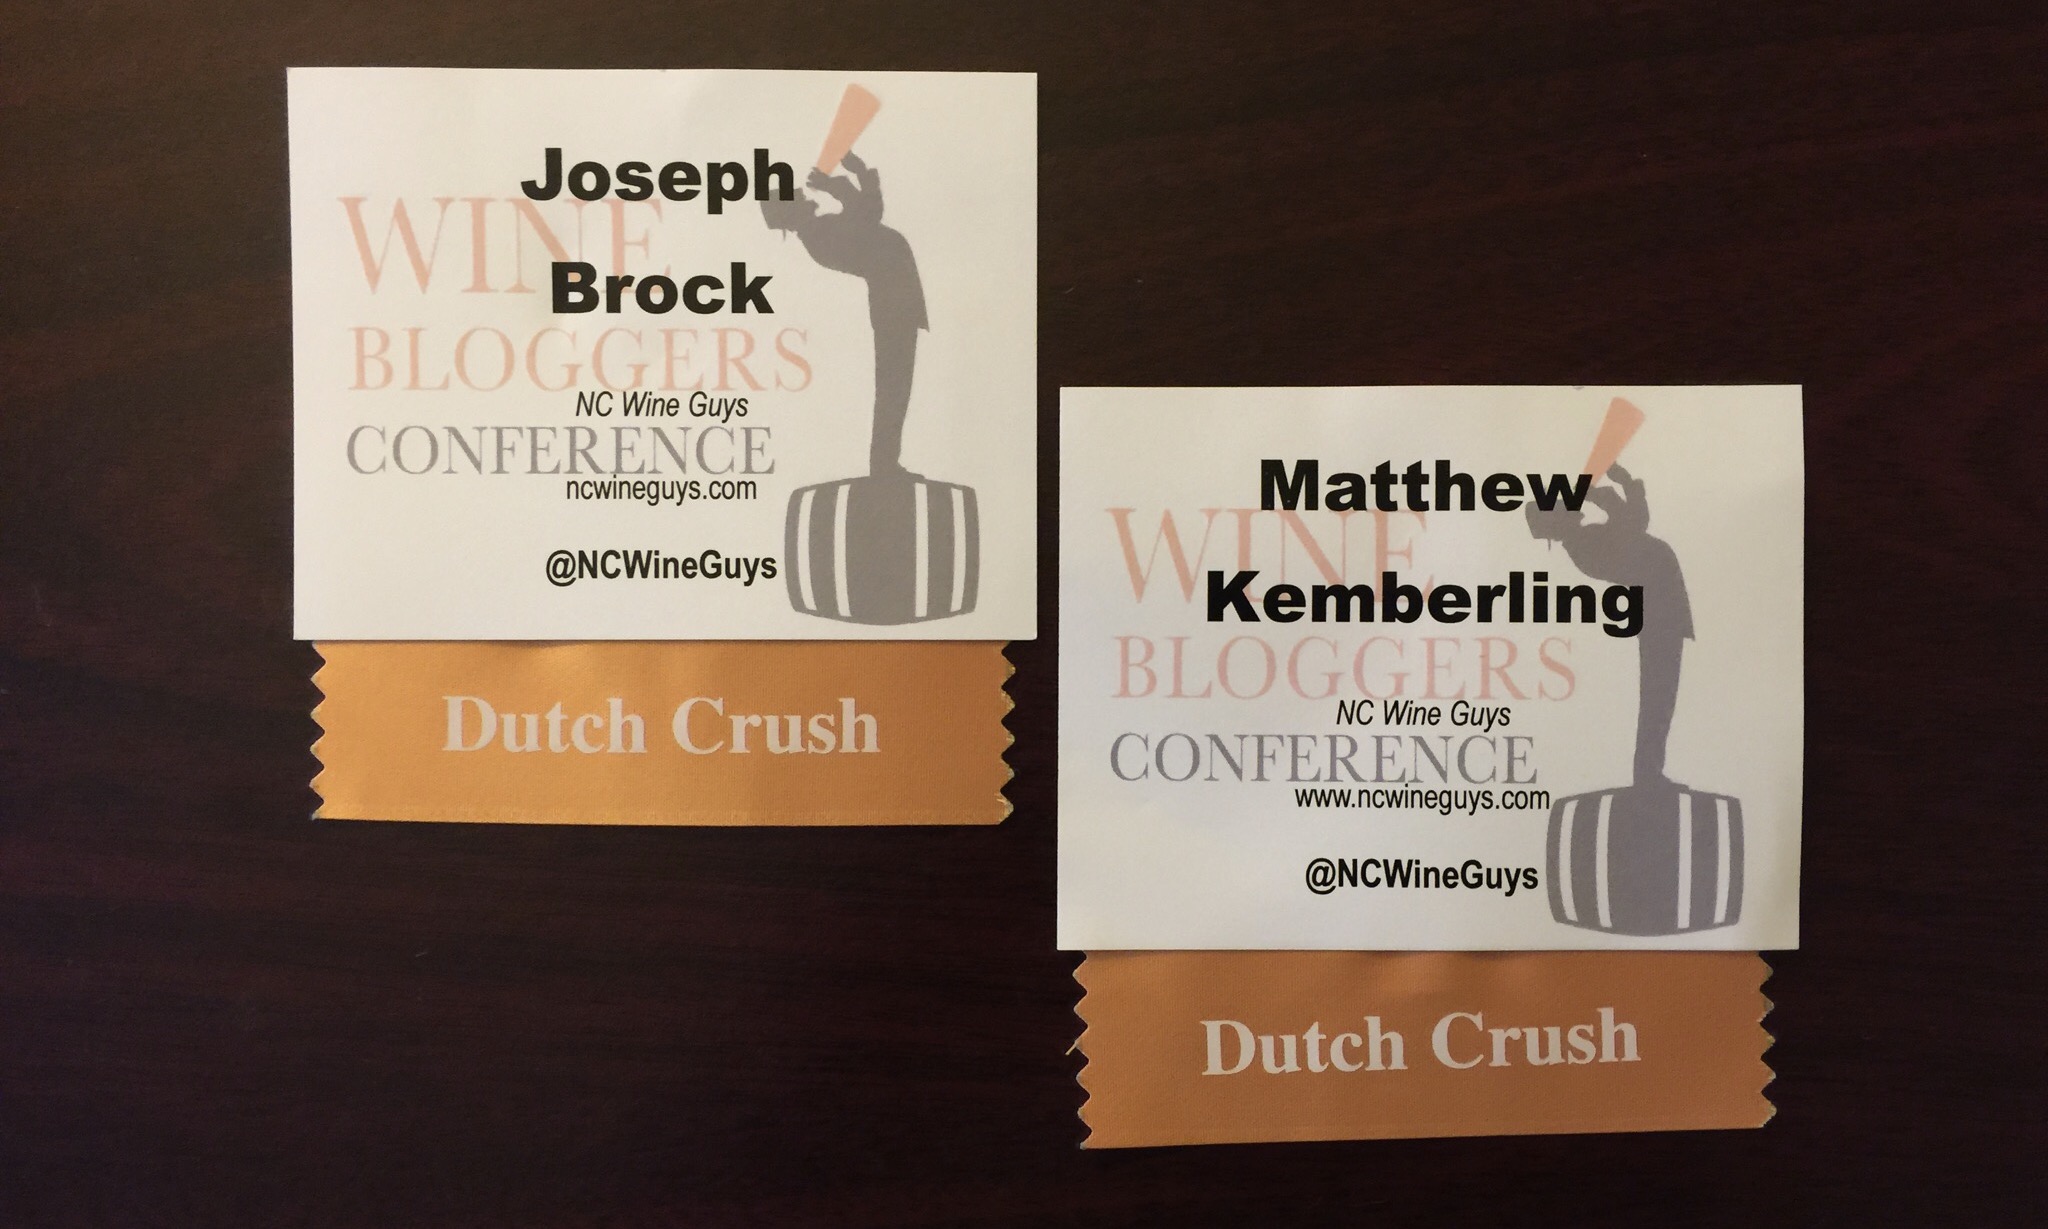 Our name badges from the Wine Bloggers Conference in Lodi, CA